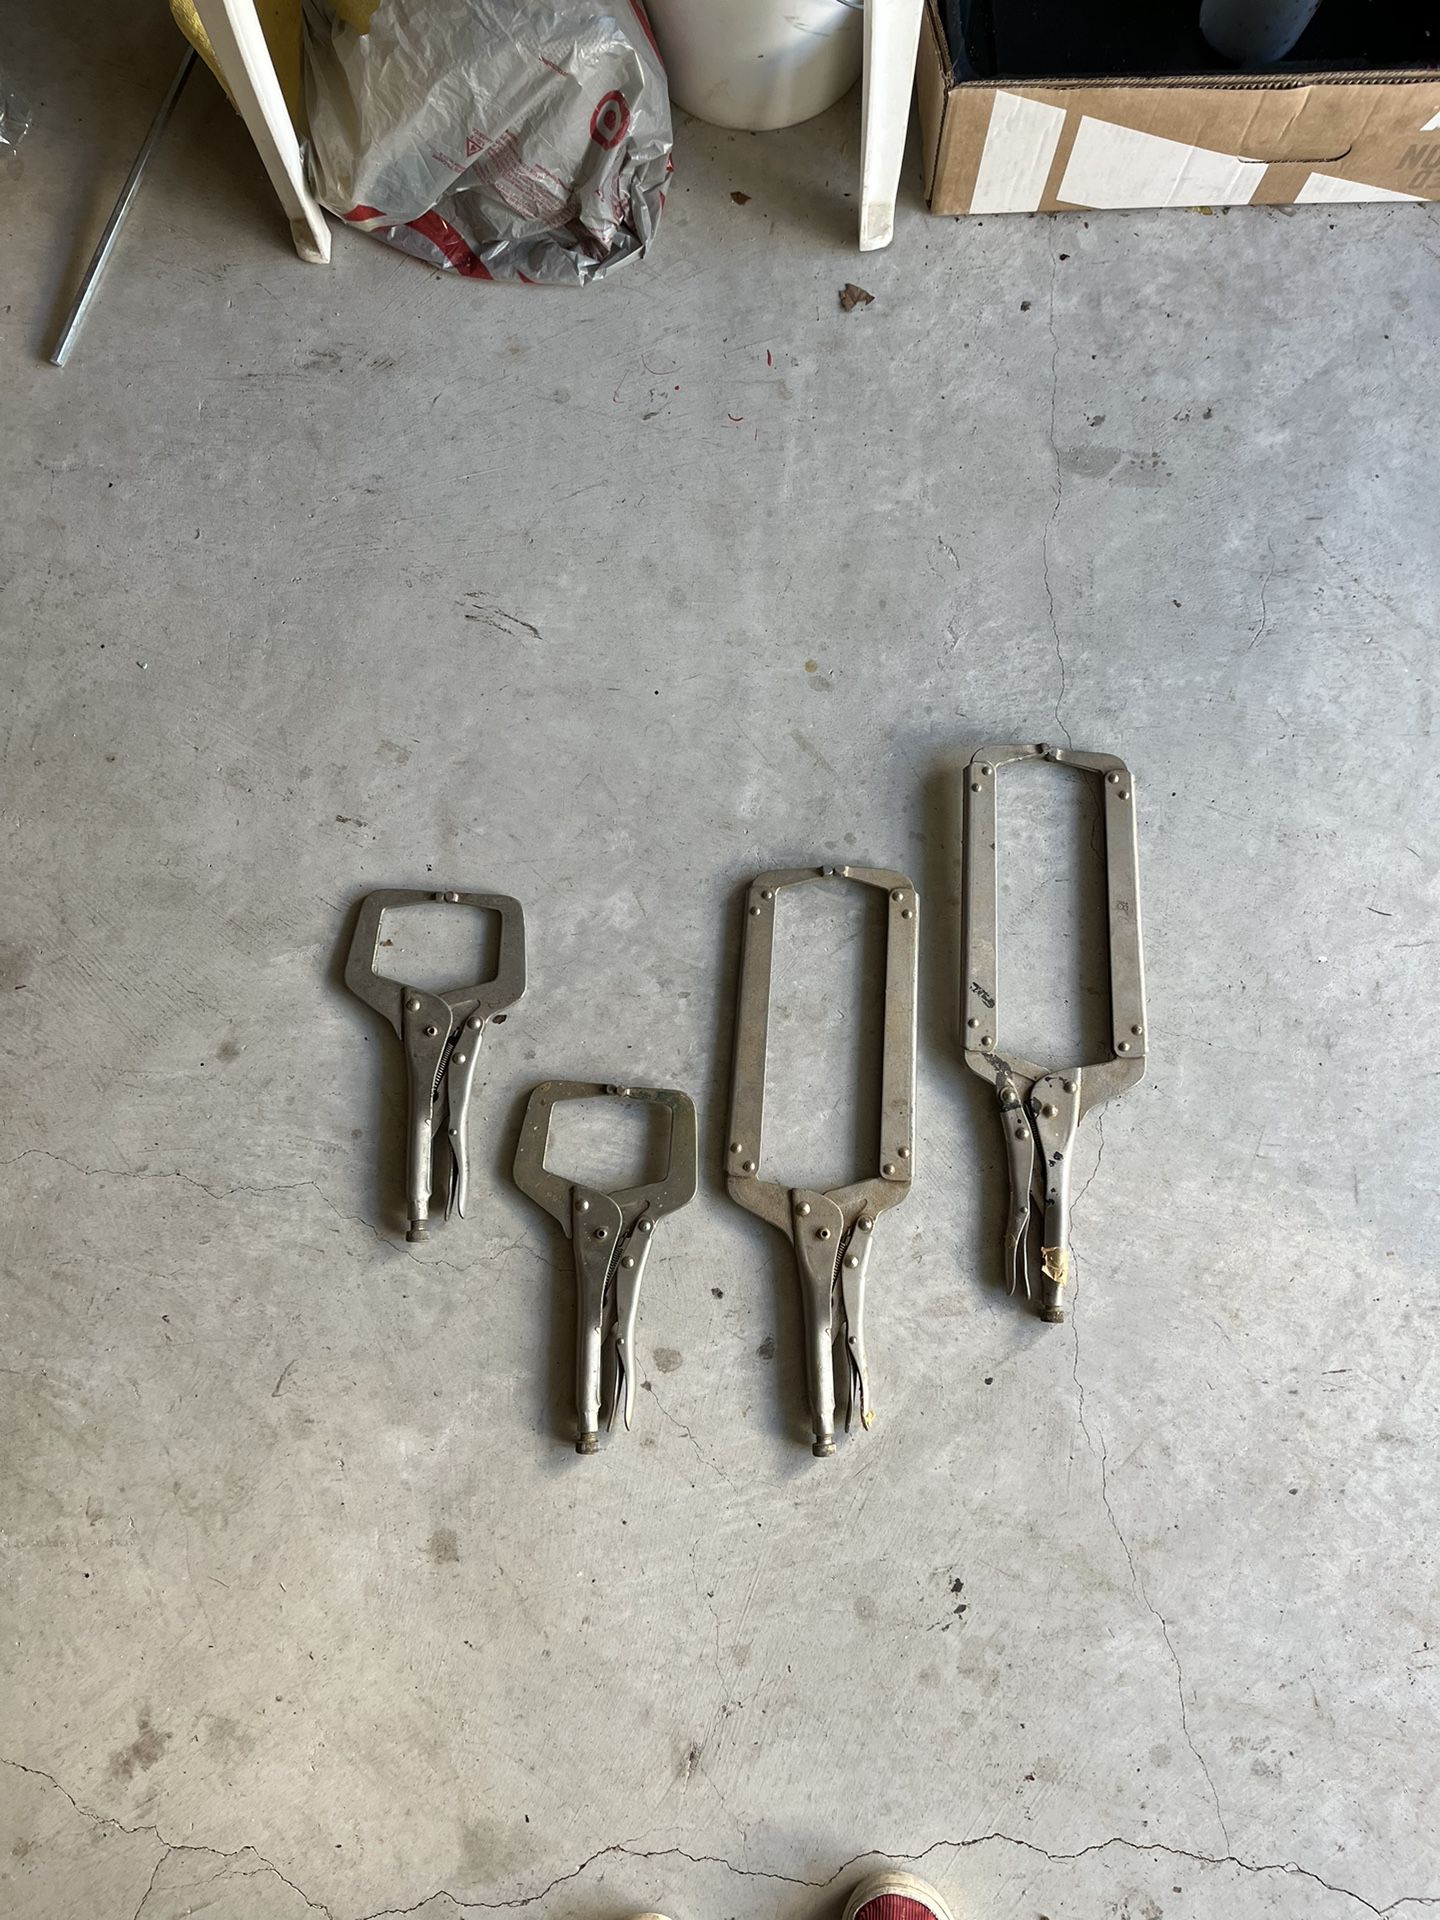 Metal Clamps 